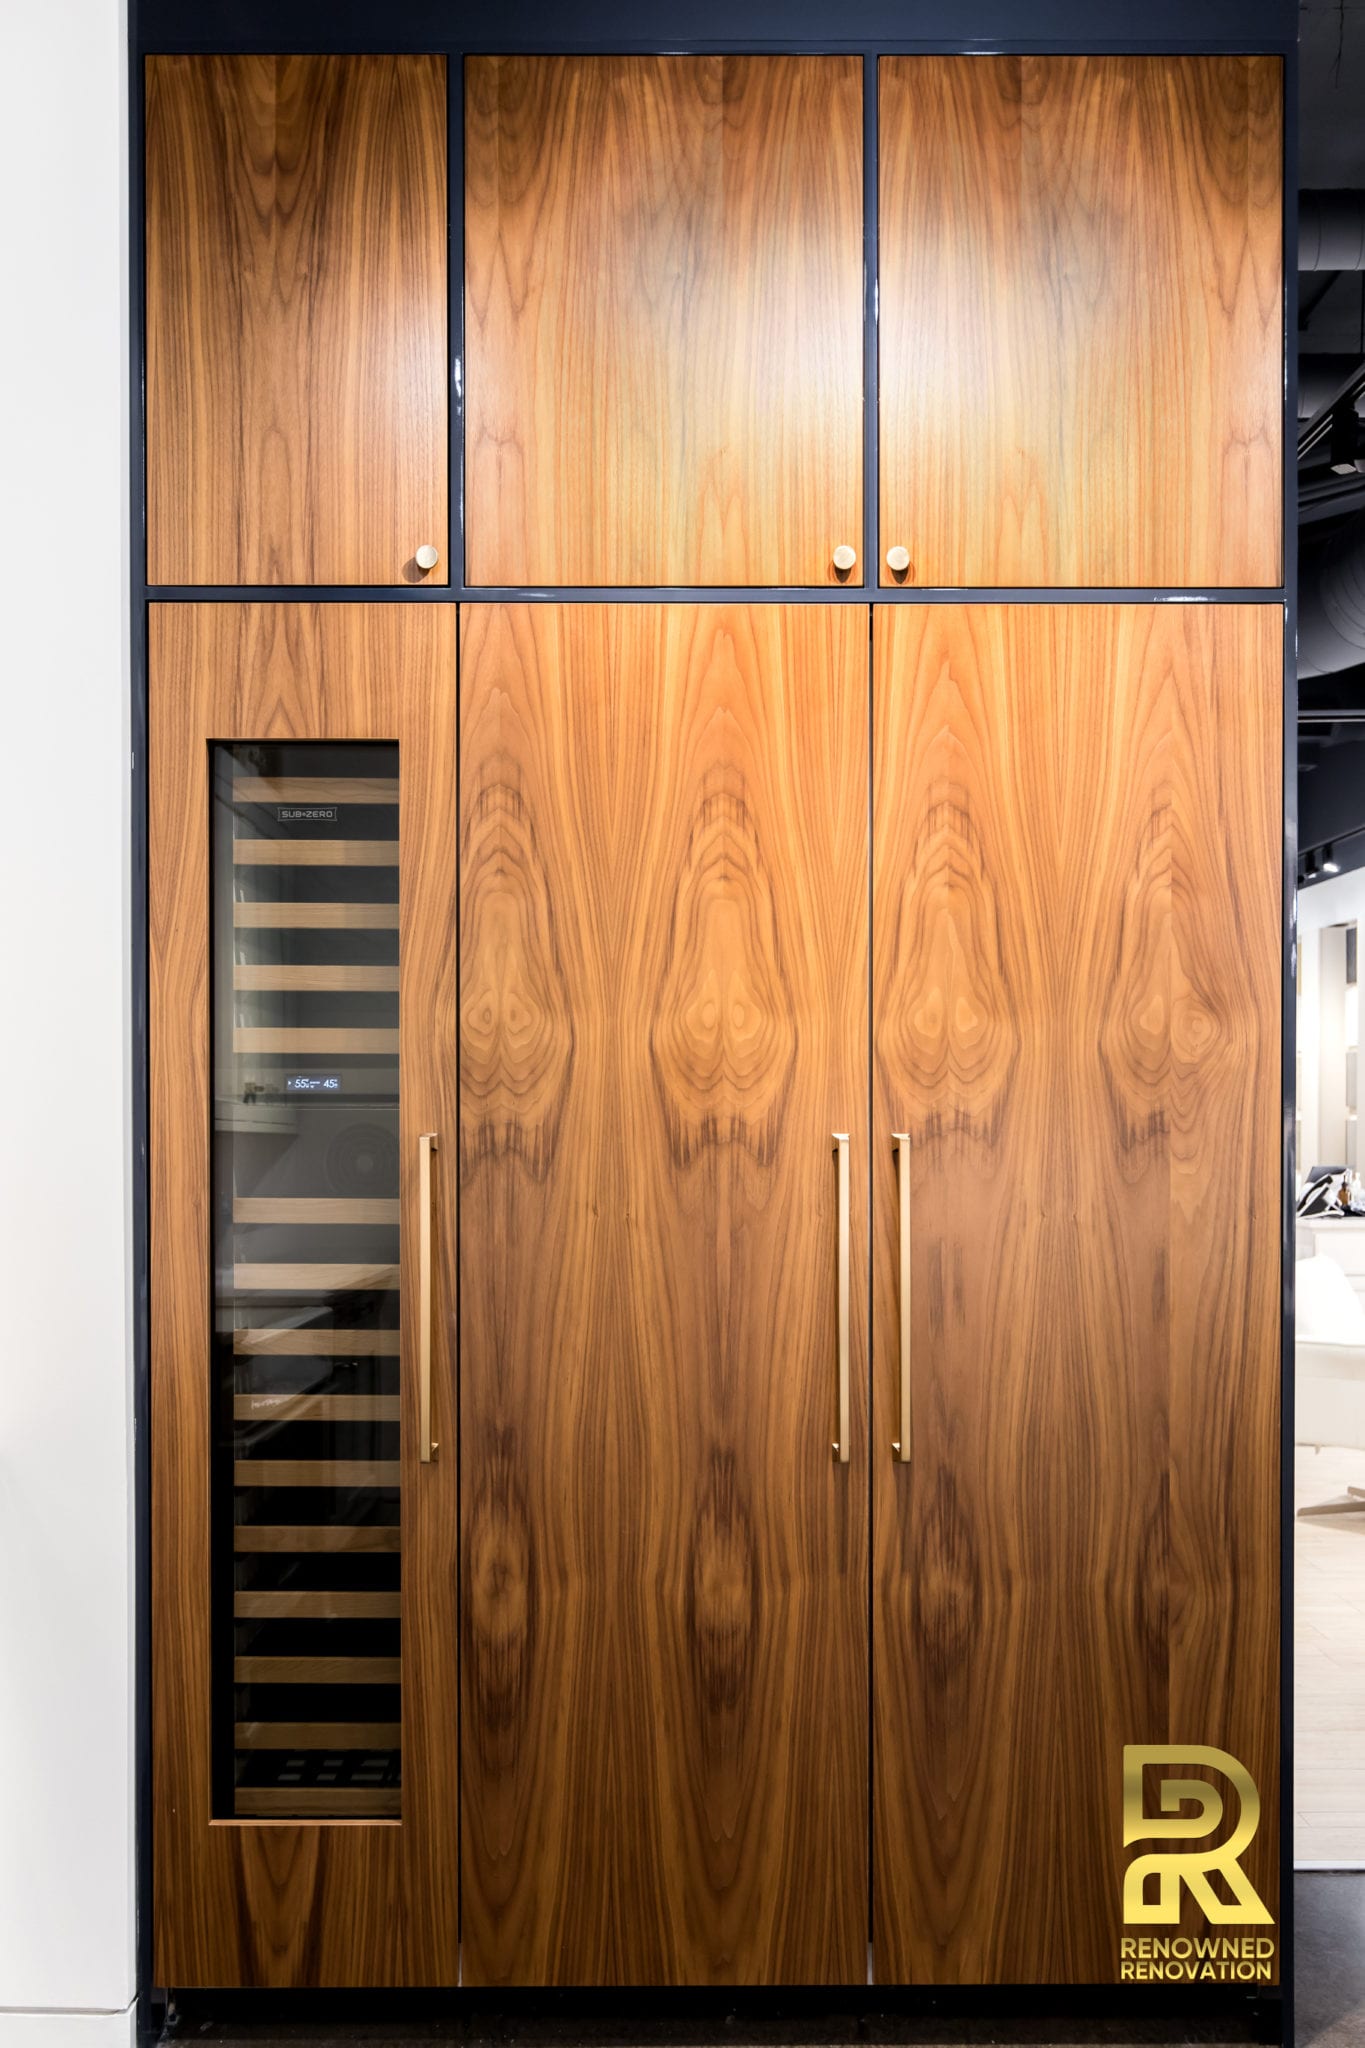 Kohler-Signature-Store-Dallas-StyleCraft-Cabinets-Designed-by-Renowned-Renovation9